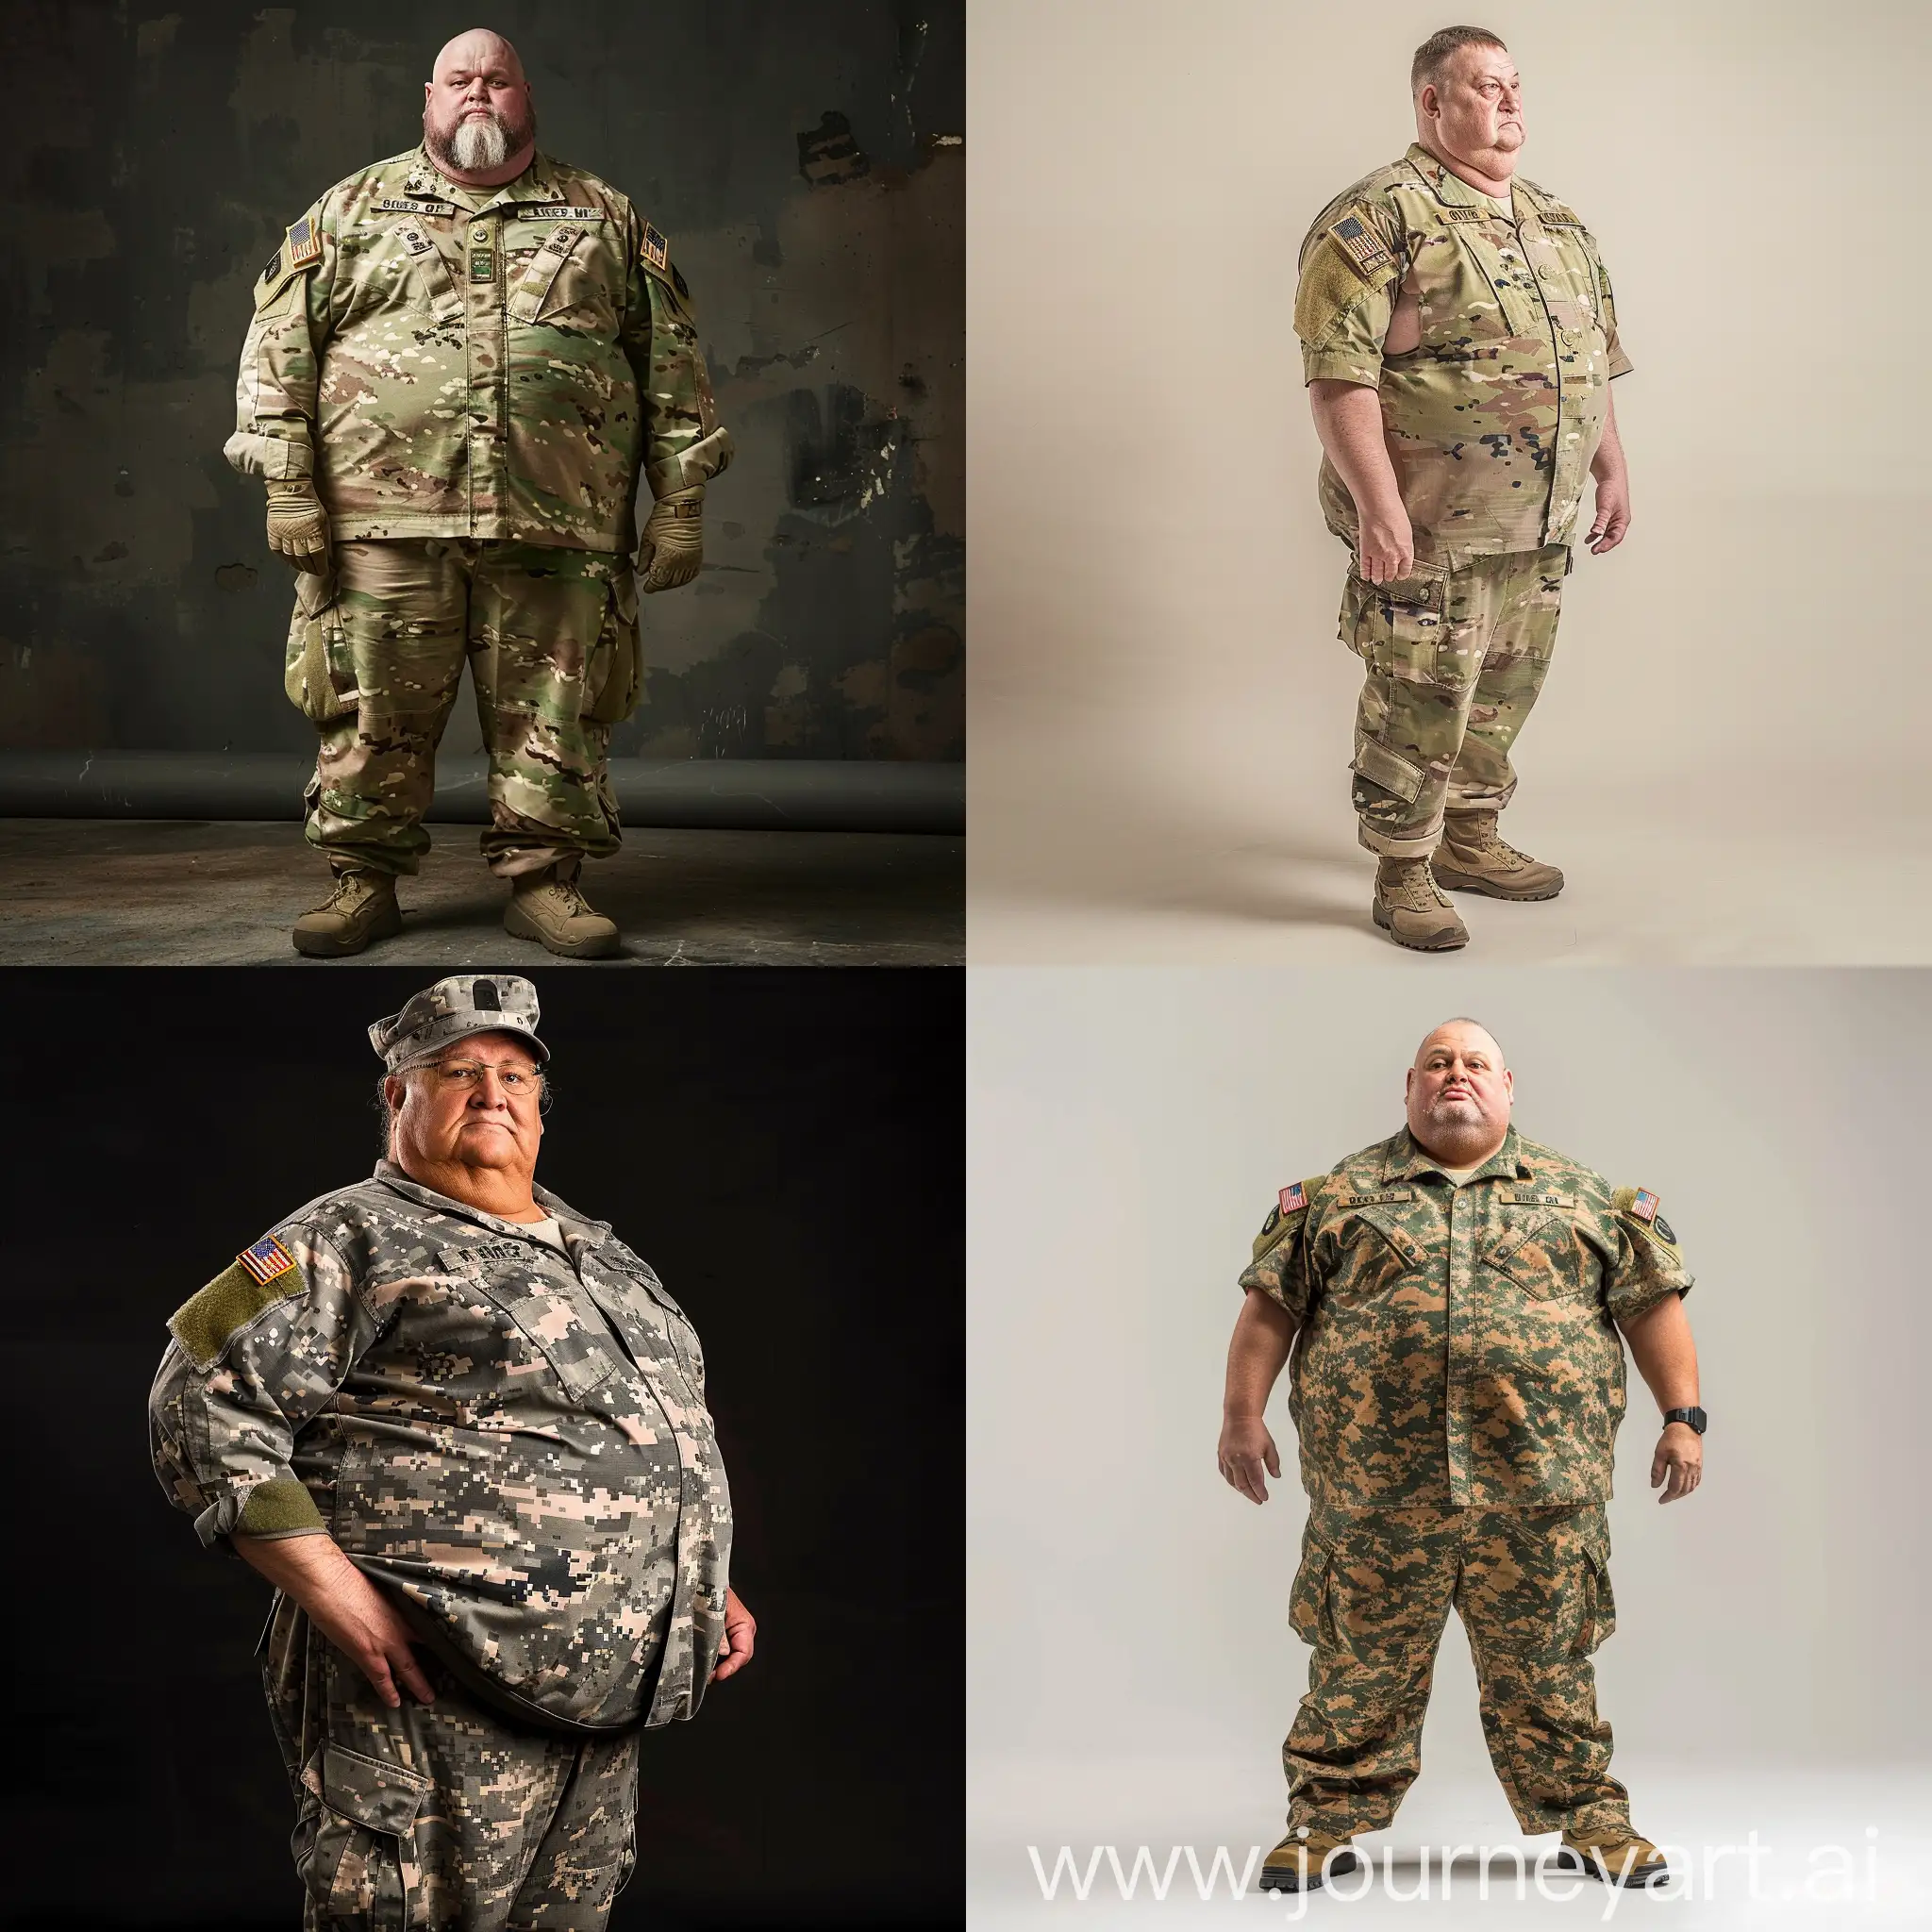 Full body photo of a fat man aged 60 wearing a complete us army combat uniform -- ar 16:9